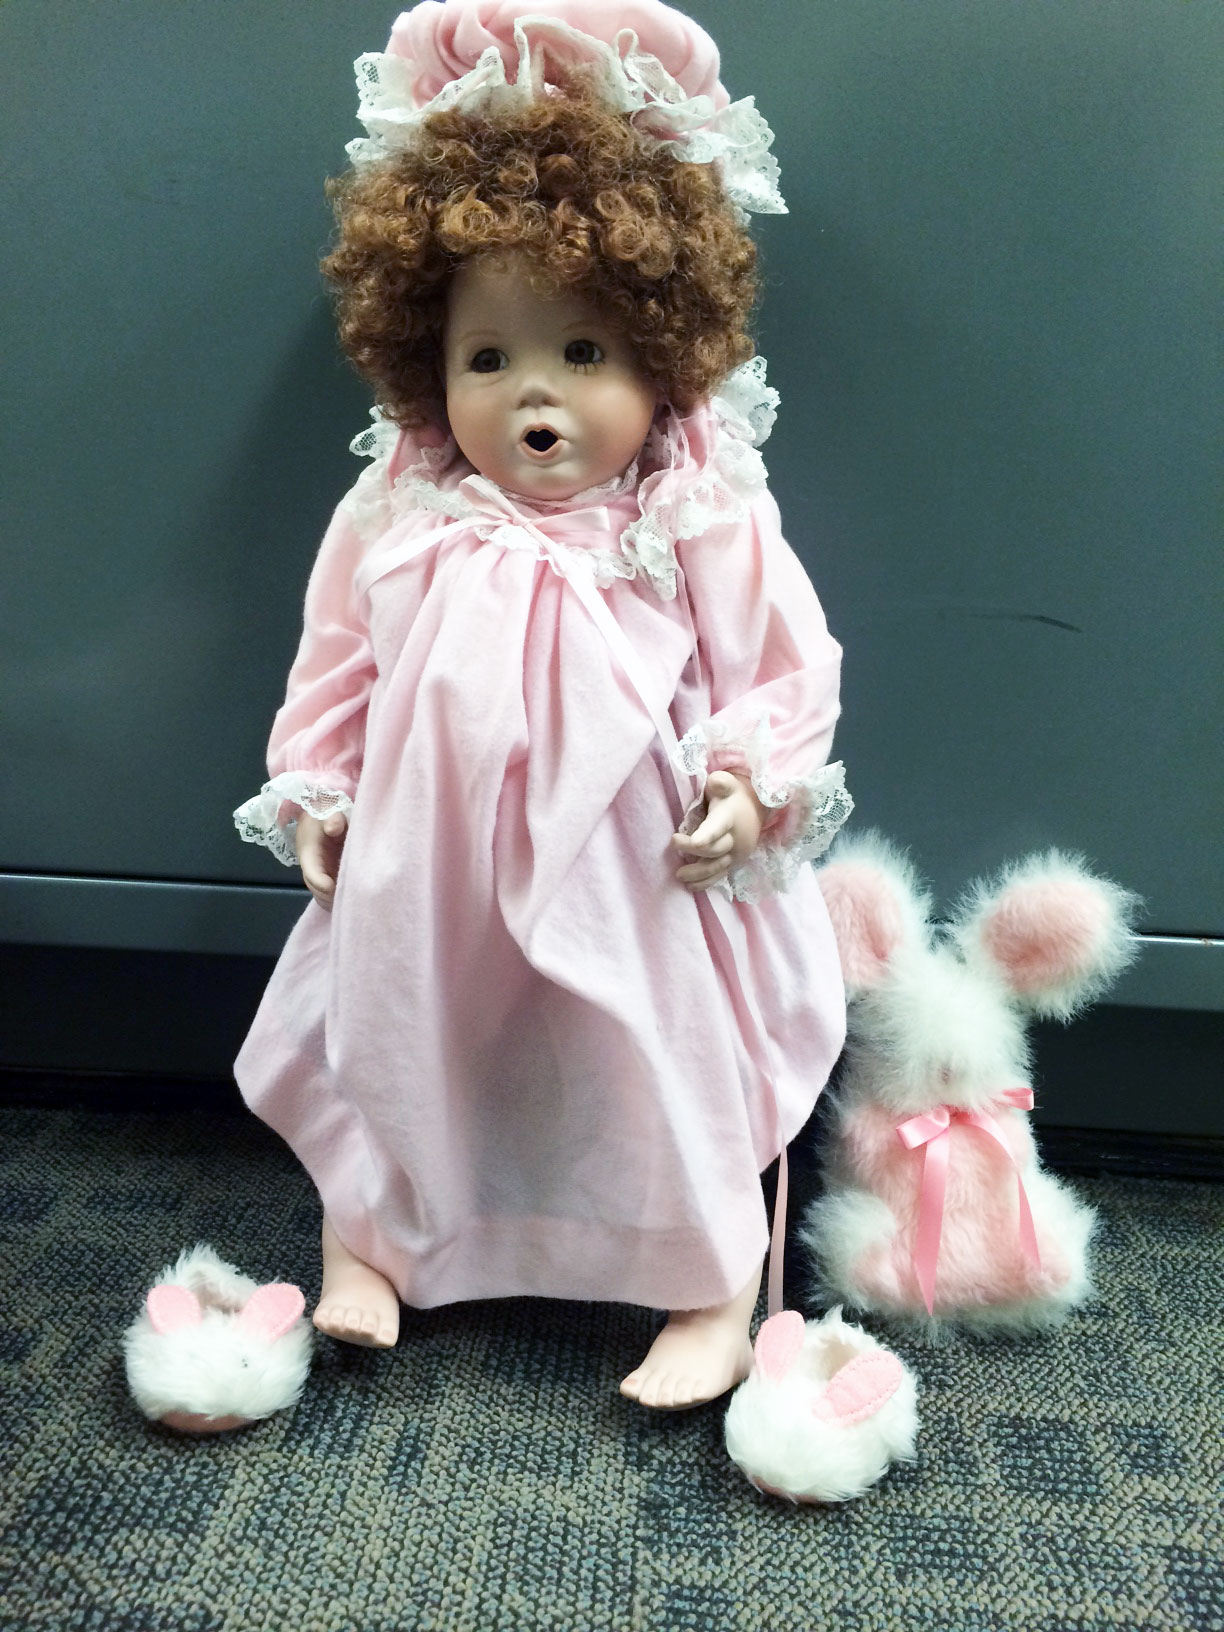 PHOTO: Porcelain dolls are mysteriously left on the doorstep of California families.